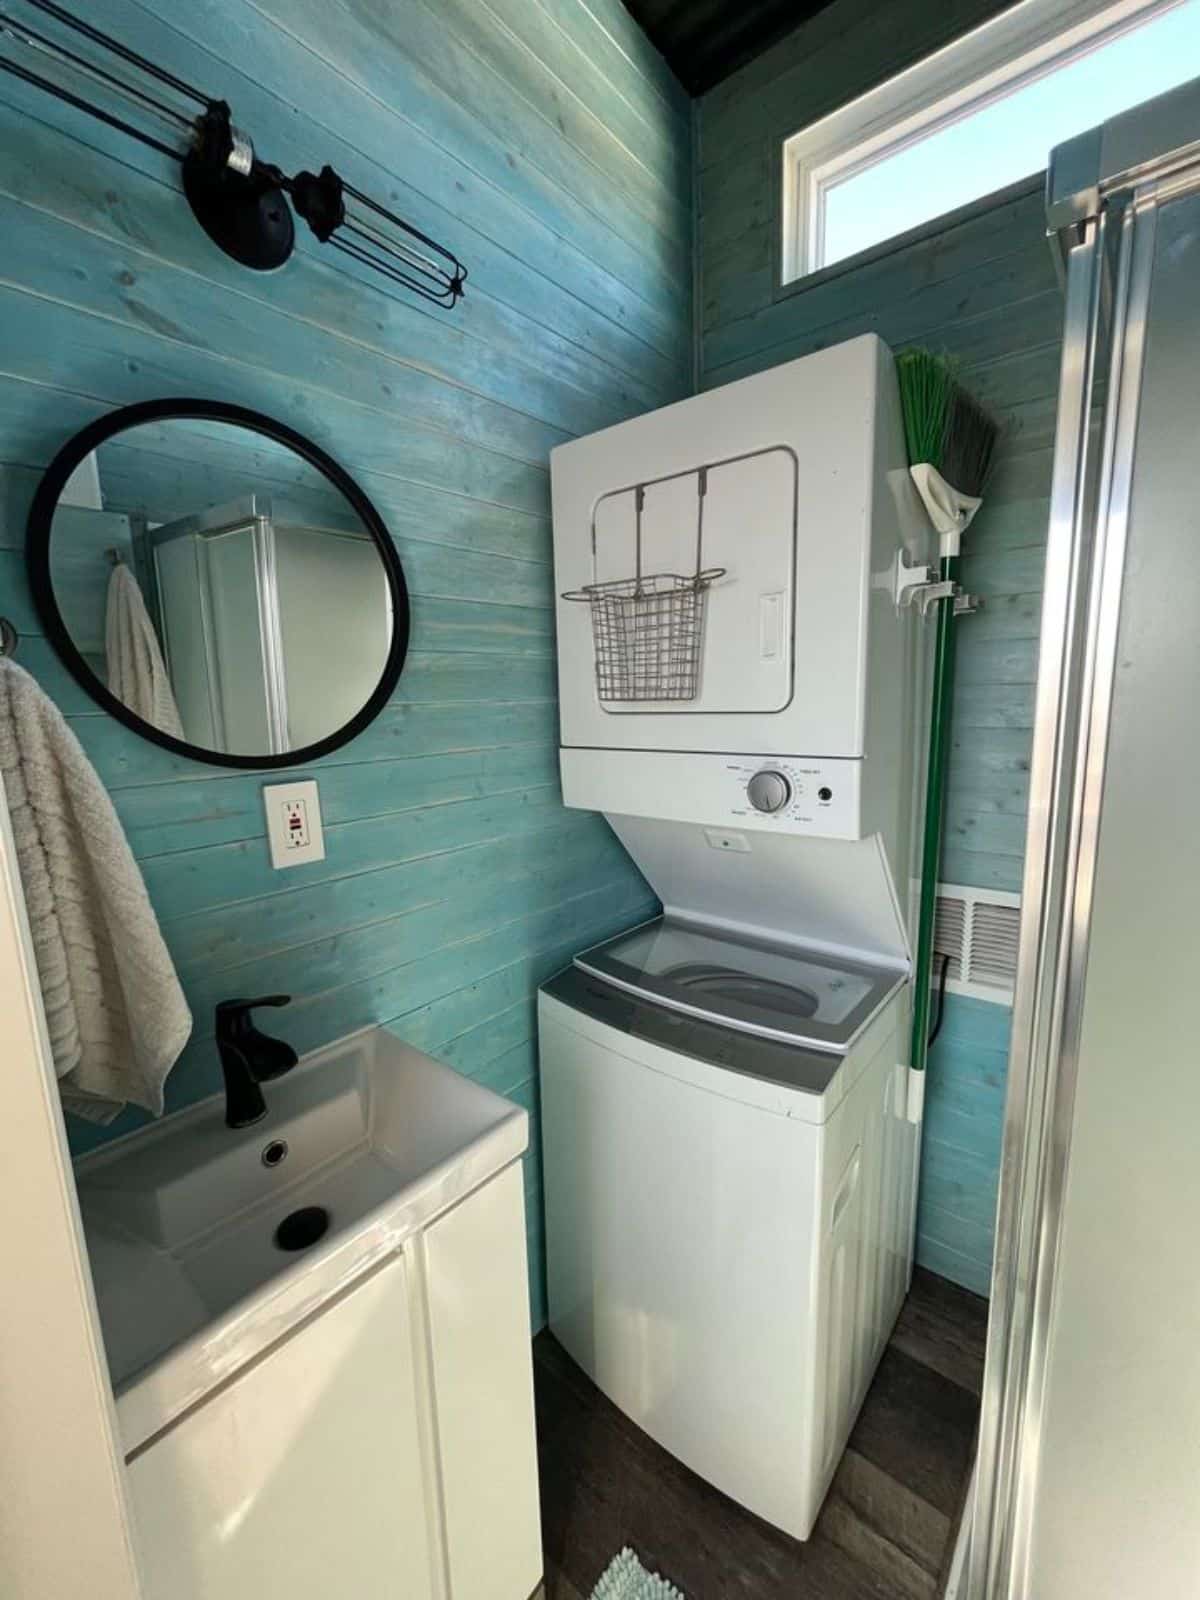 bathroom of 35’ tiny home has all the standard fittings with stackable washer dryer combo